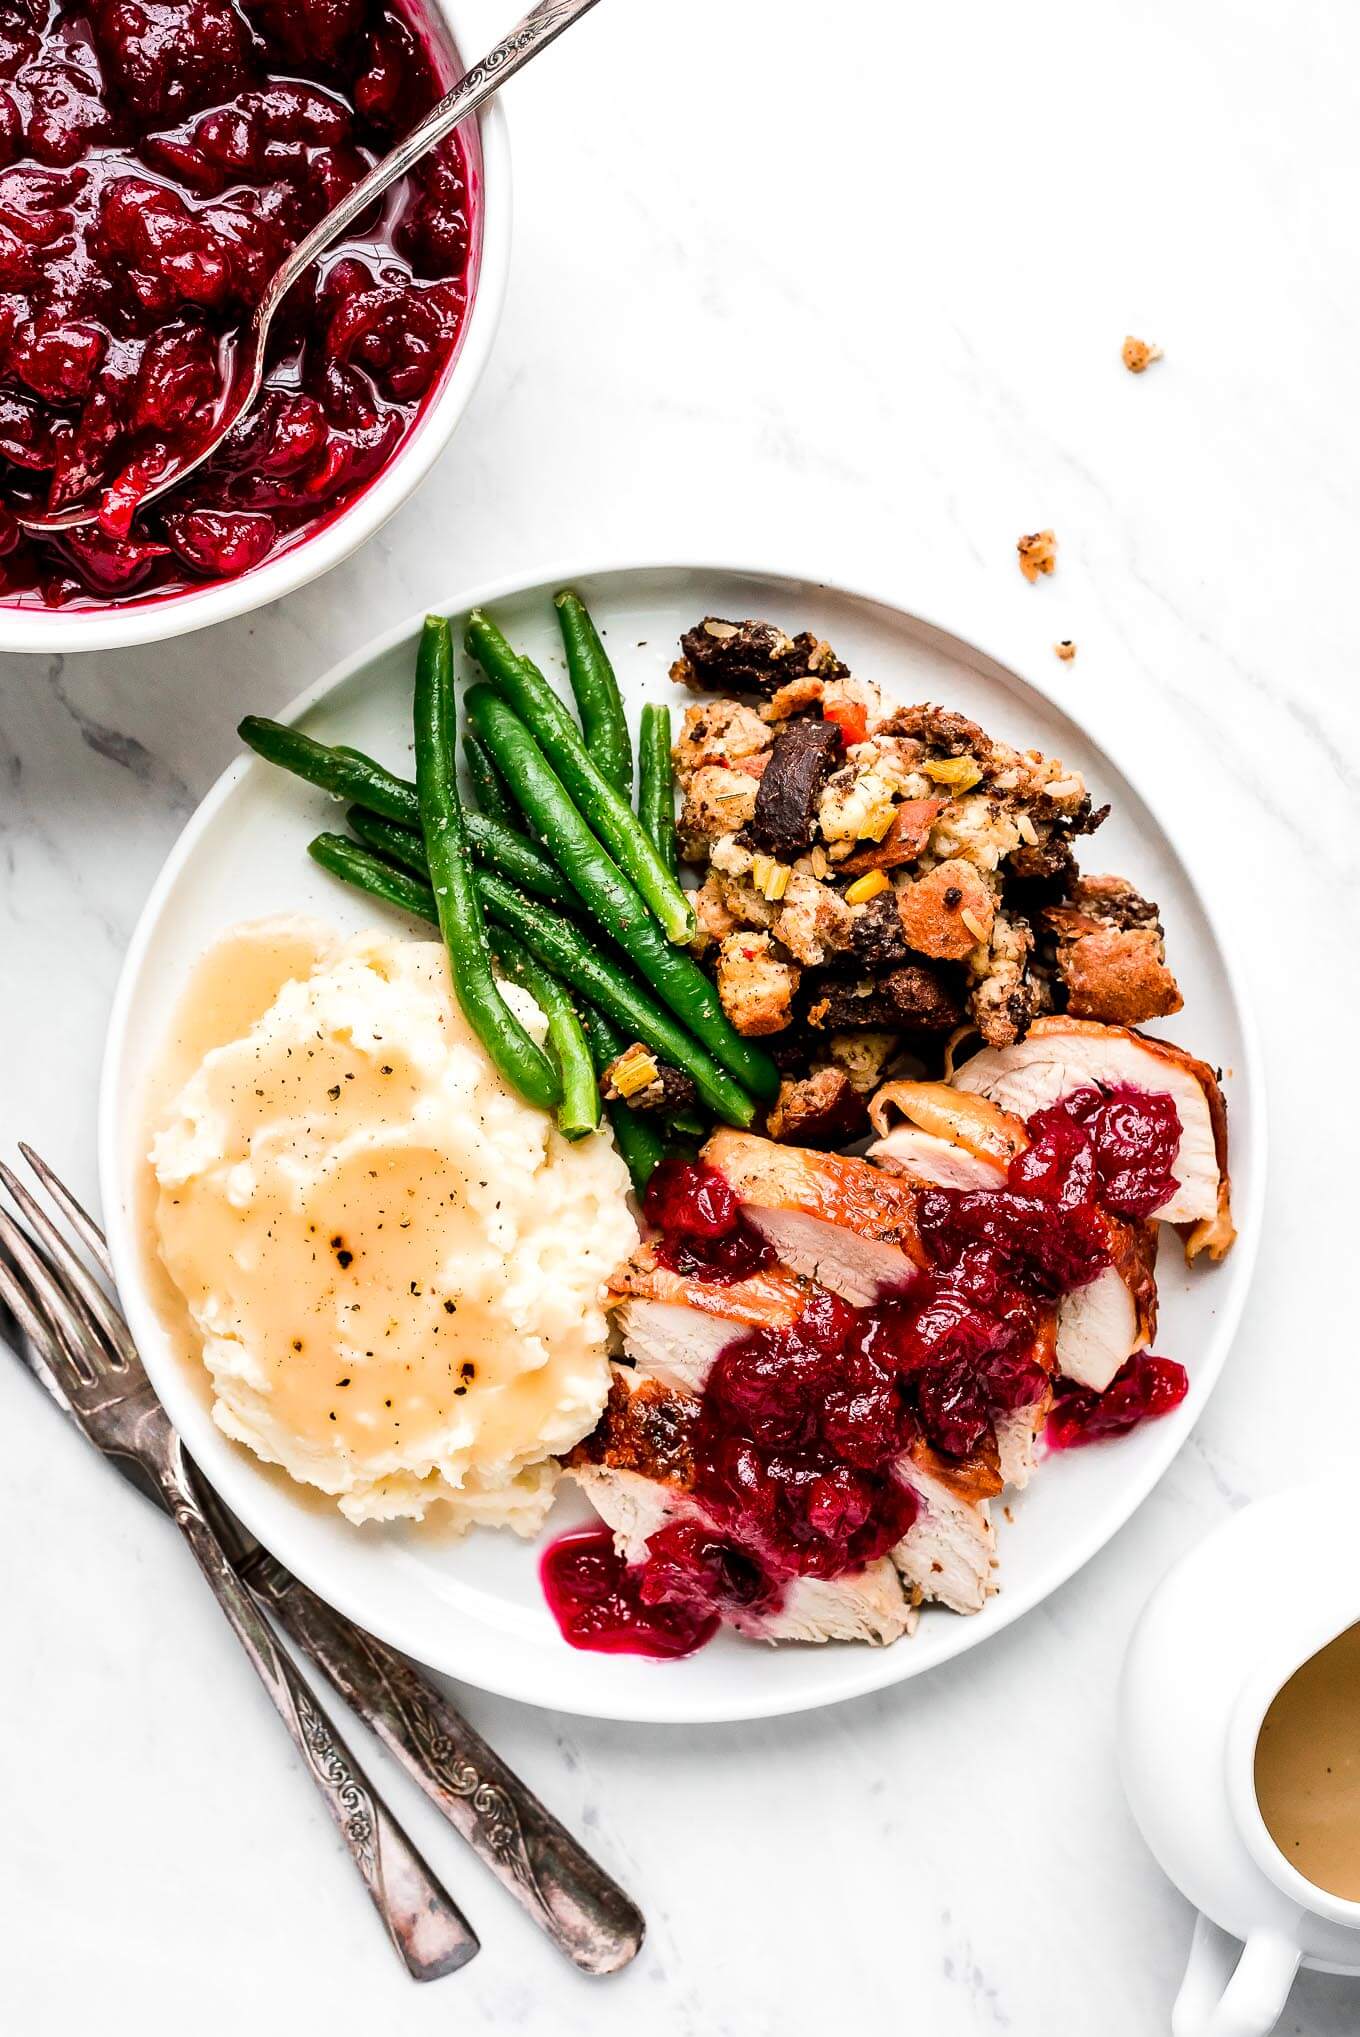 A plate of Thanksgiving dinner- herb butter tureky, cranberry sauce, mashed potatoes and gravy, green beans, and stuffing.